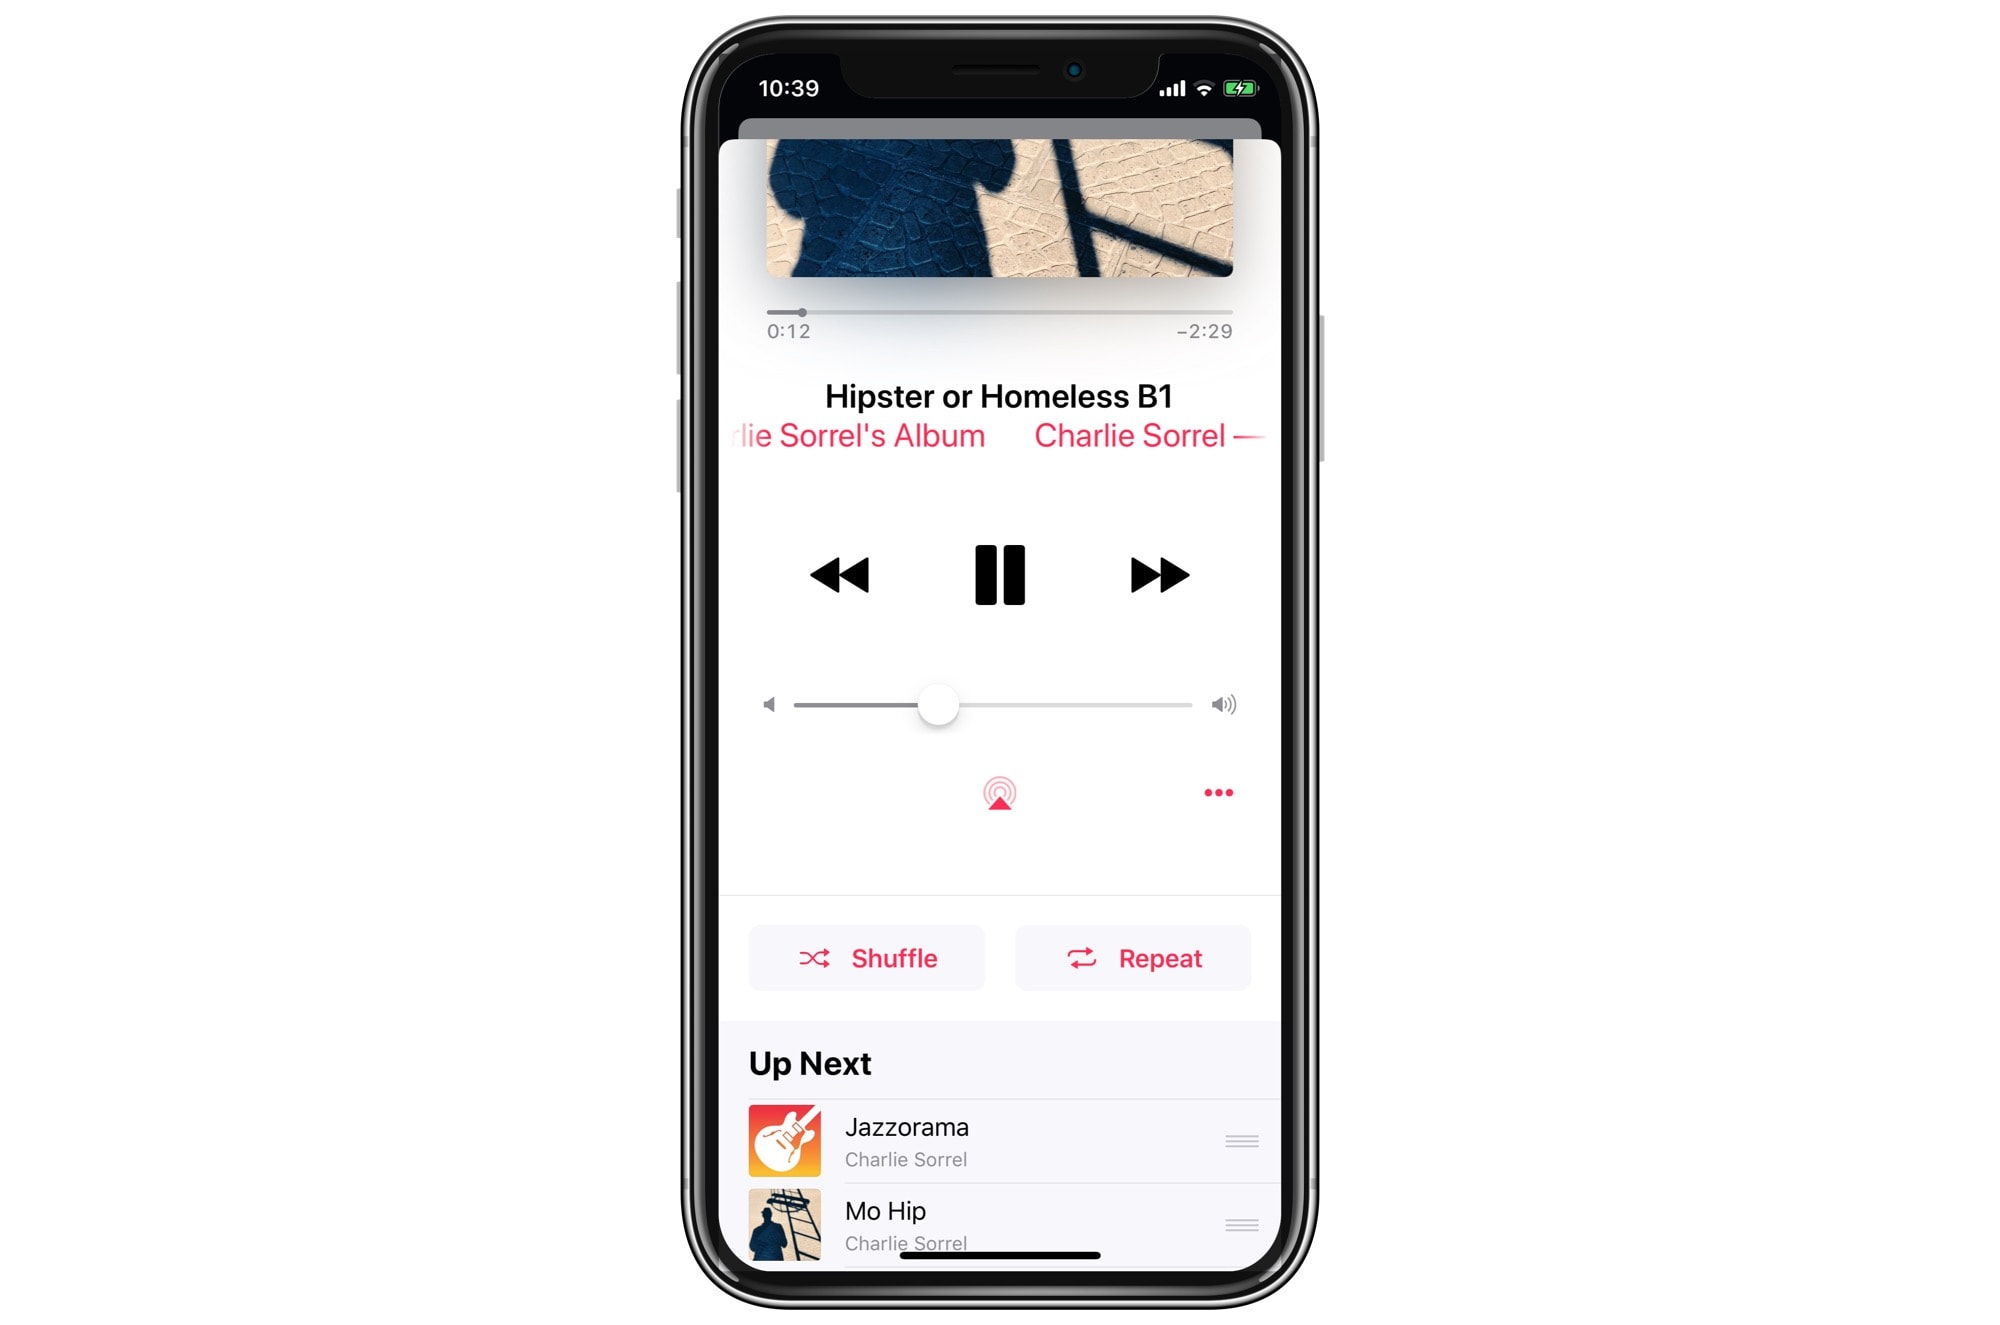 The old way to shuffle and repeat songs and albums in Apple Music.